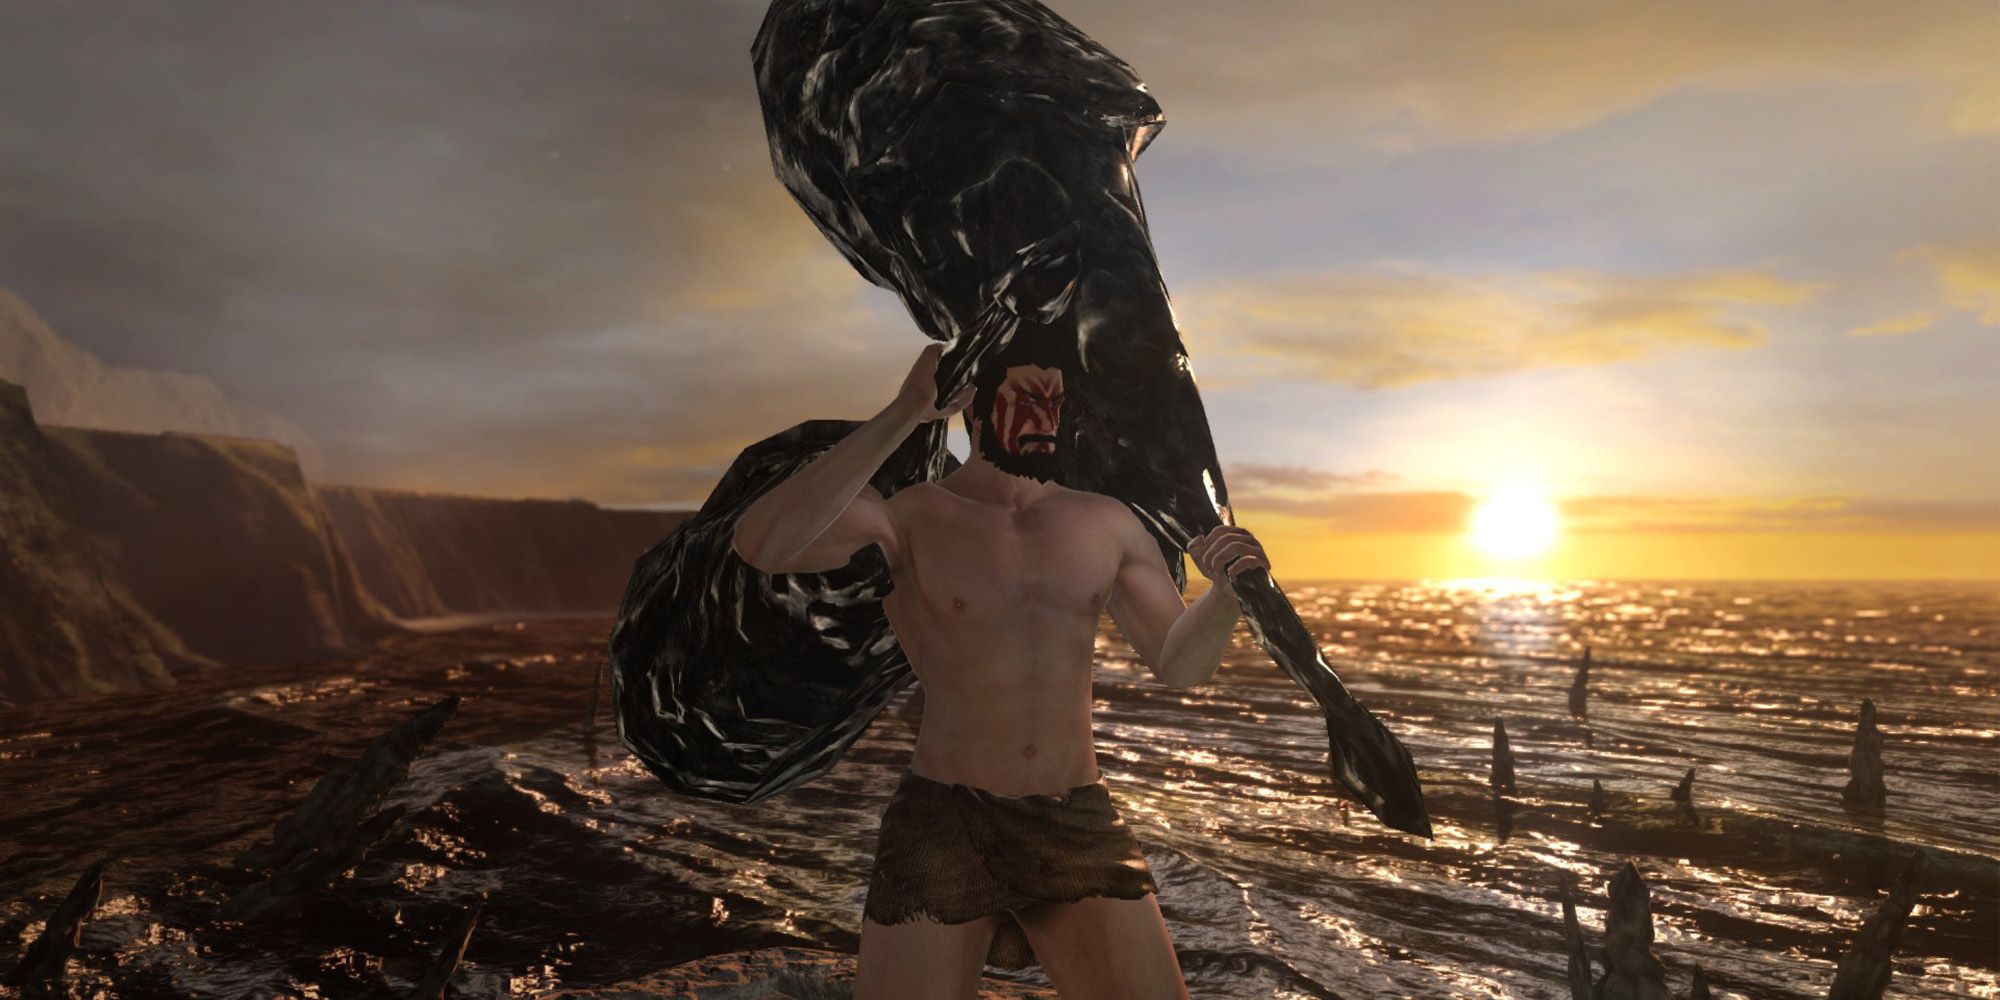 A strength build where the player wields Great Clubs Dark Souls 2